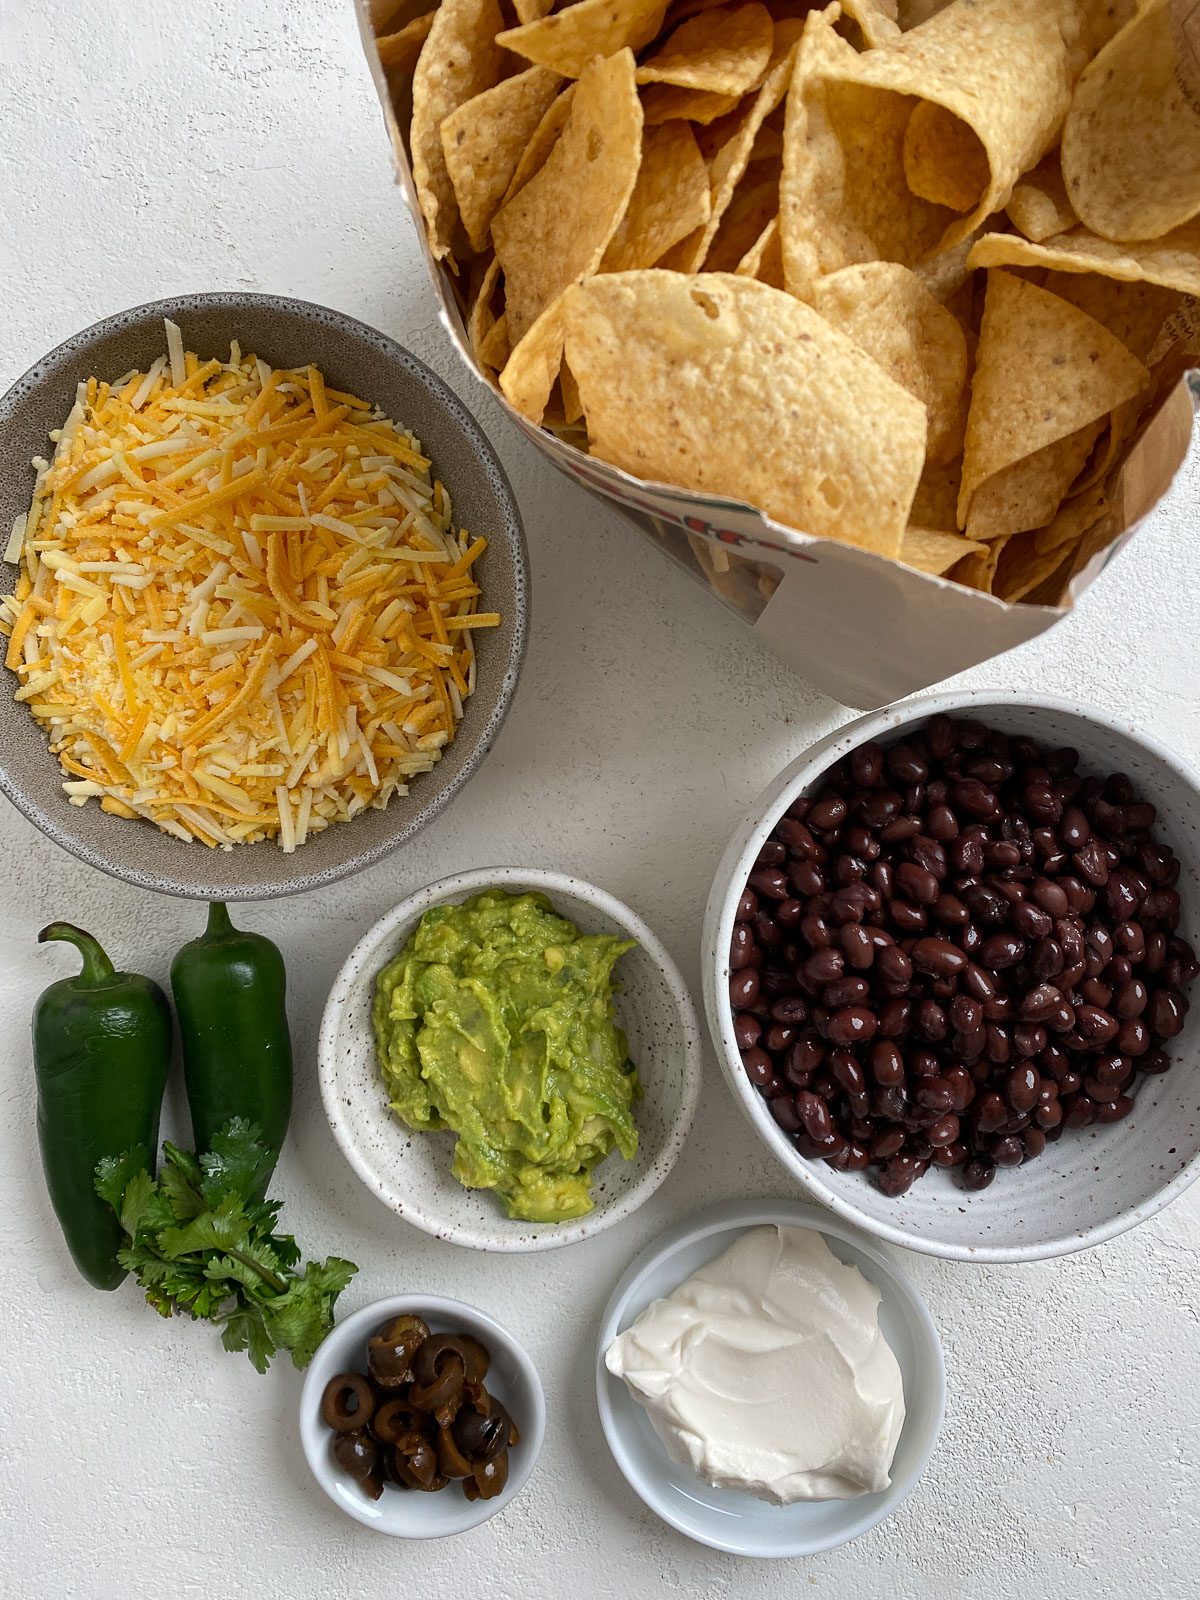 measured out ingredients for Vegan Air Fryer Nachos against white background